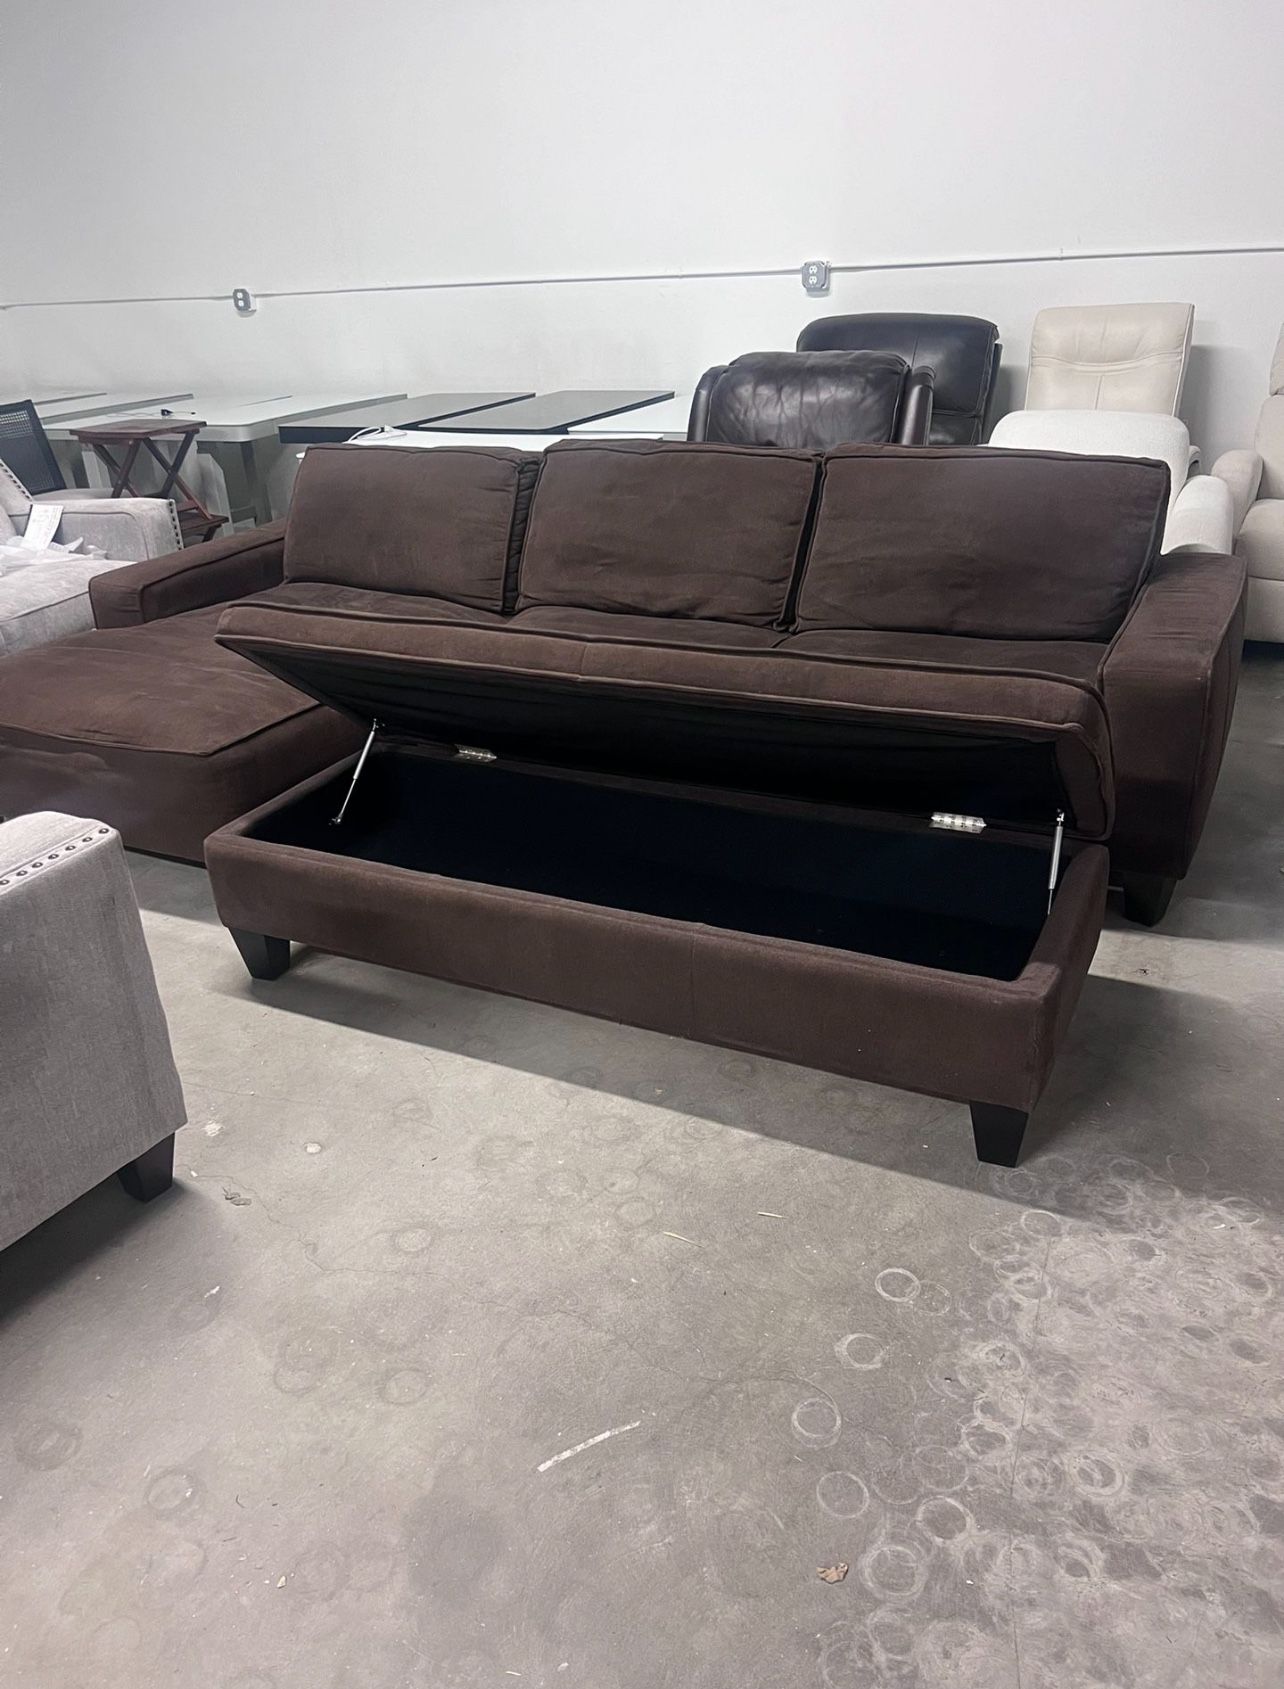 Fabric Sectional w Ottoman - Lowballers Ignored & Blocked 